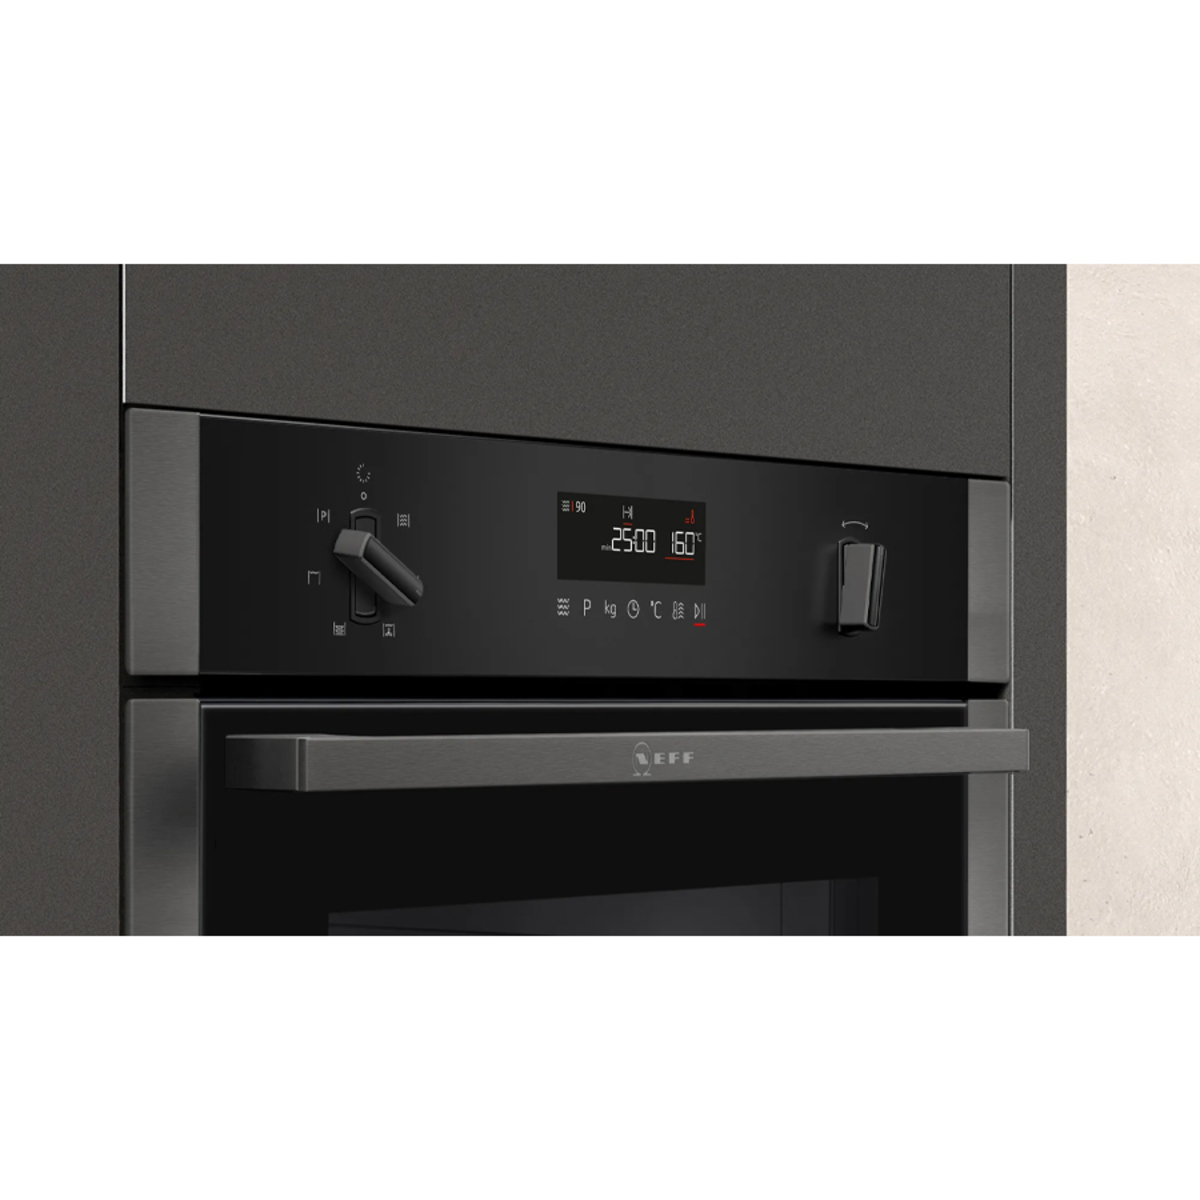 Image of NEFF C1AMG84G0B 60cm Built-in Microwave Oven With Hot Air